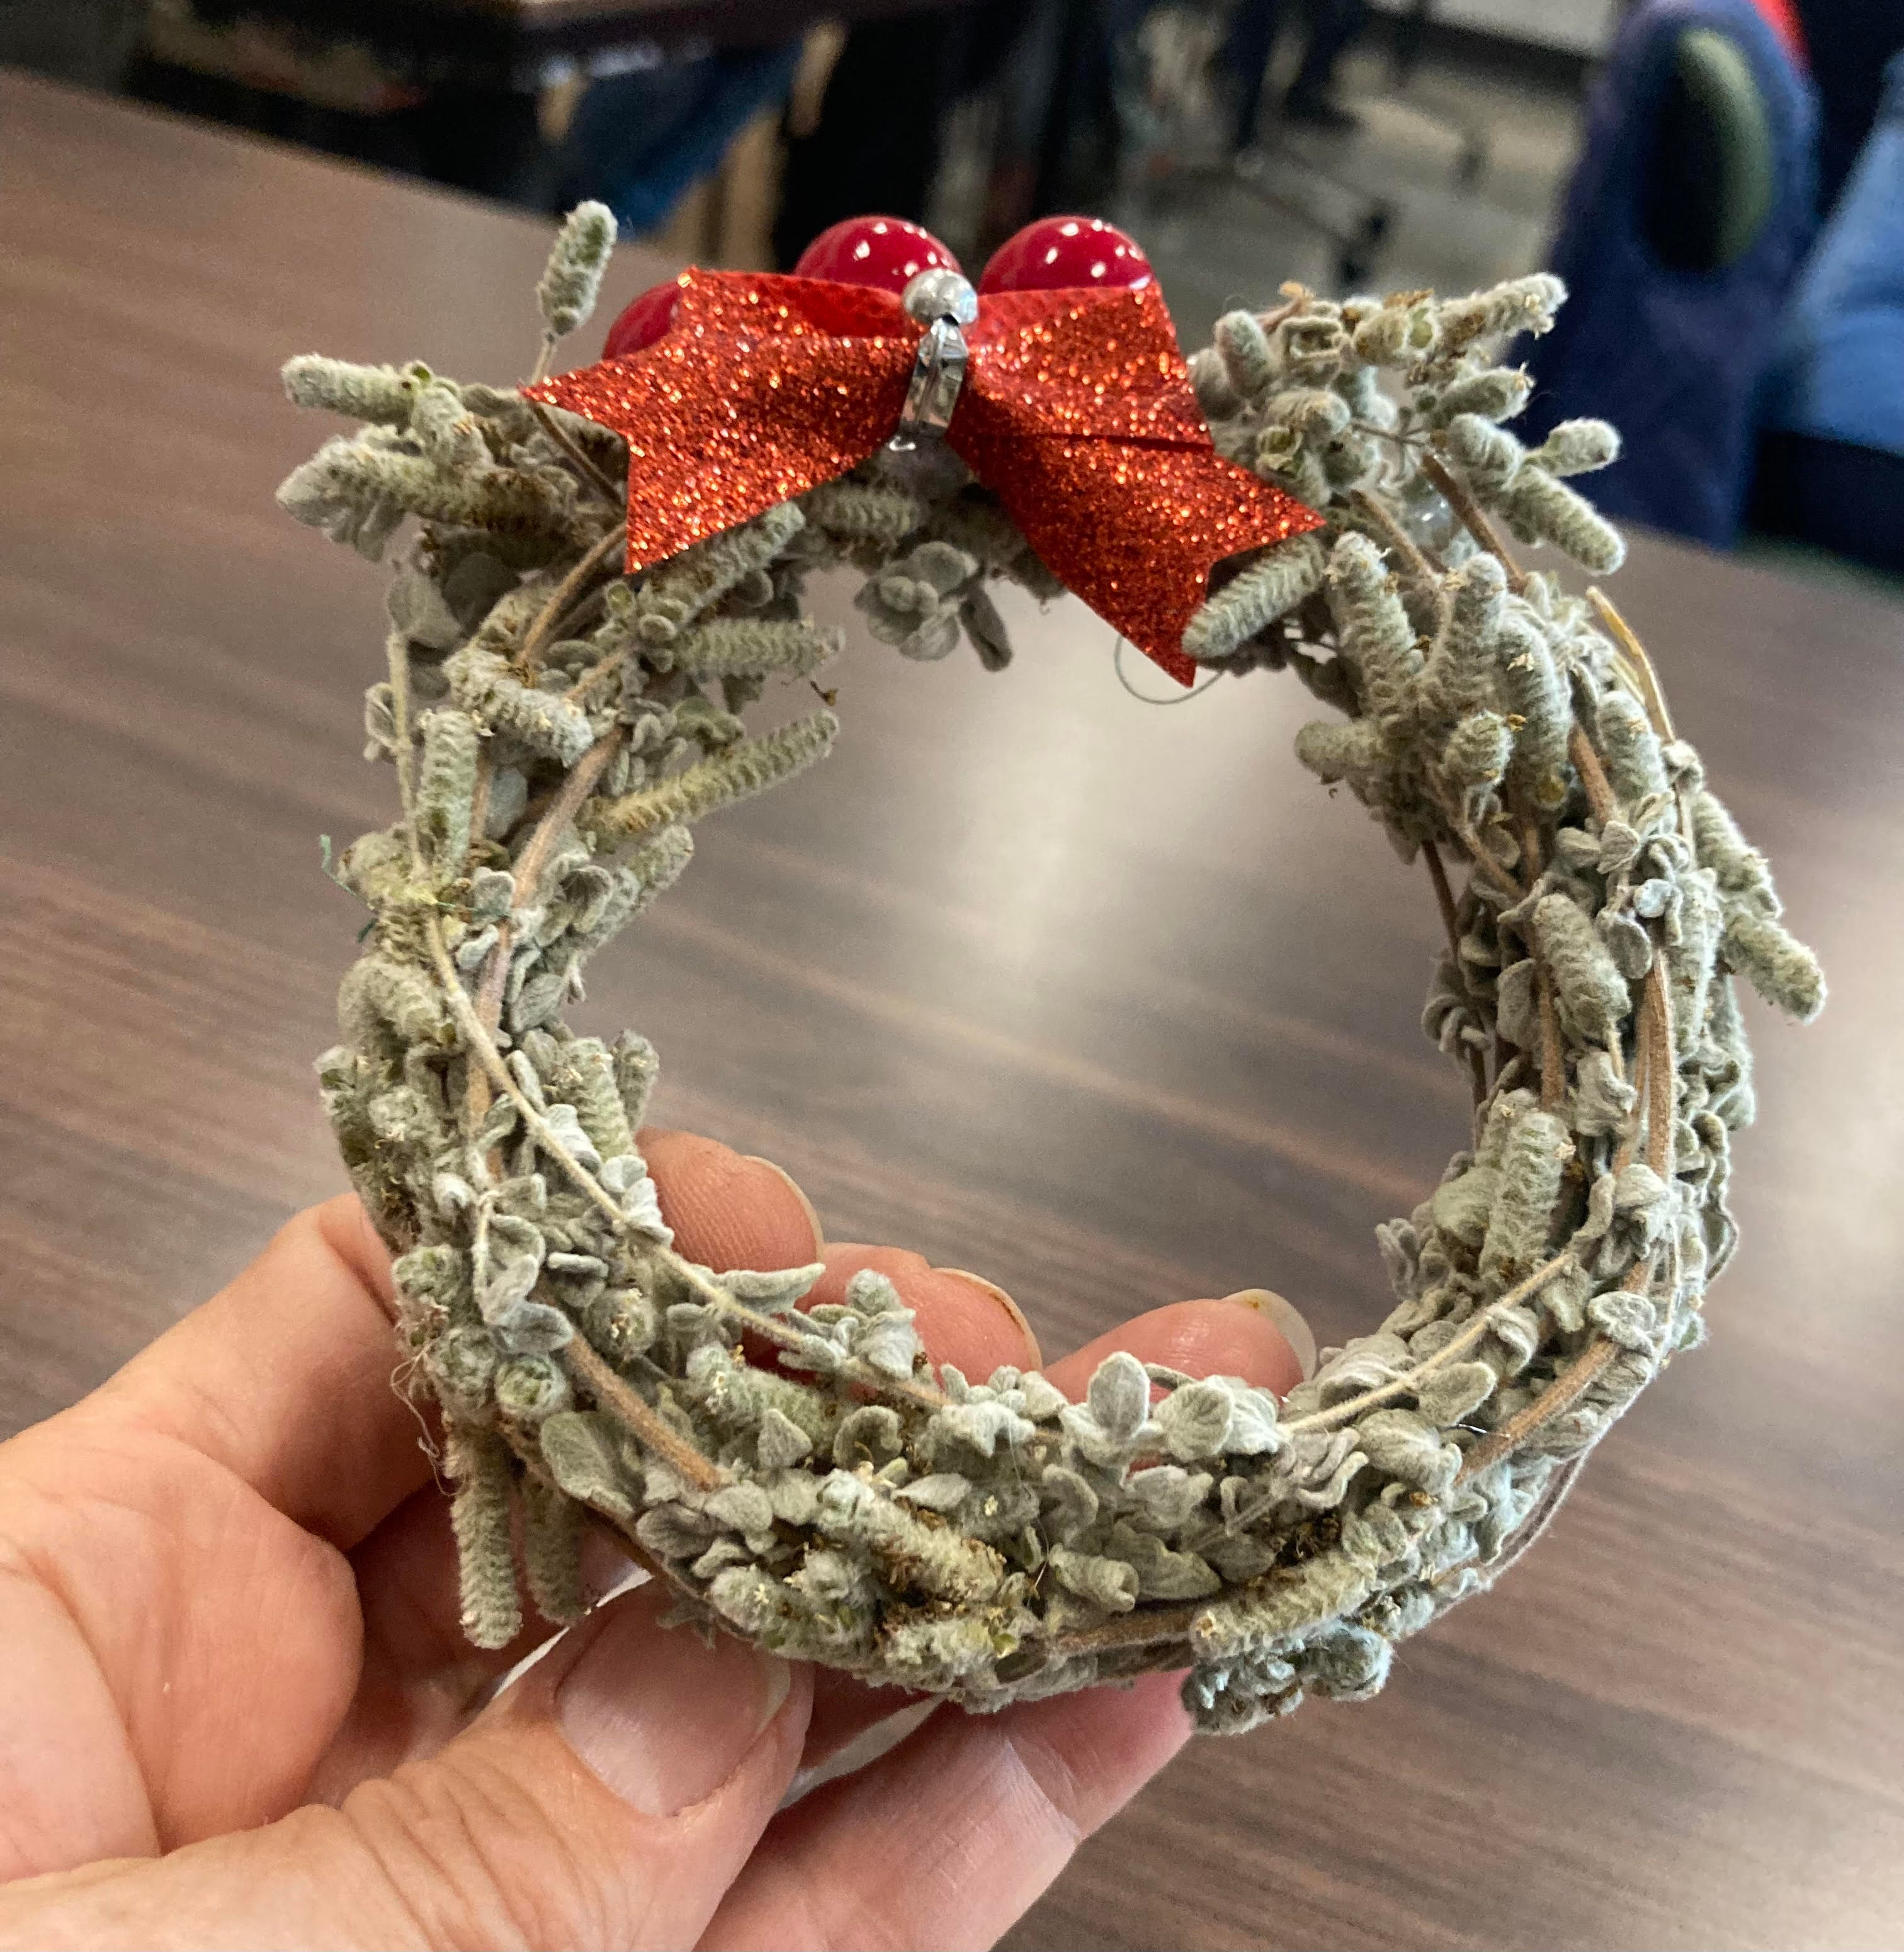 Small Ribbon Wreath Ornament, Projects